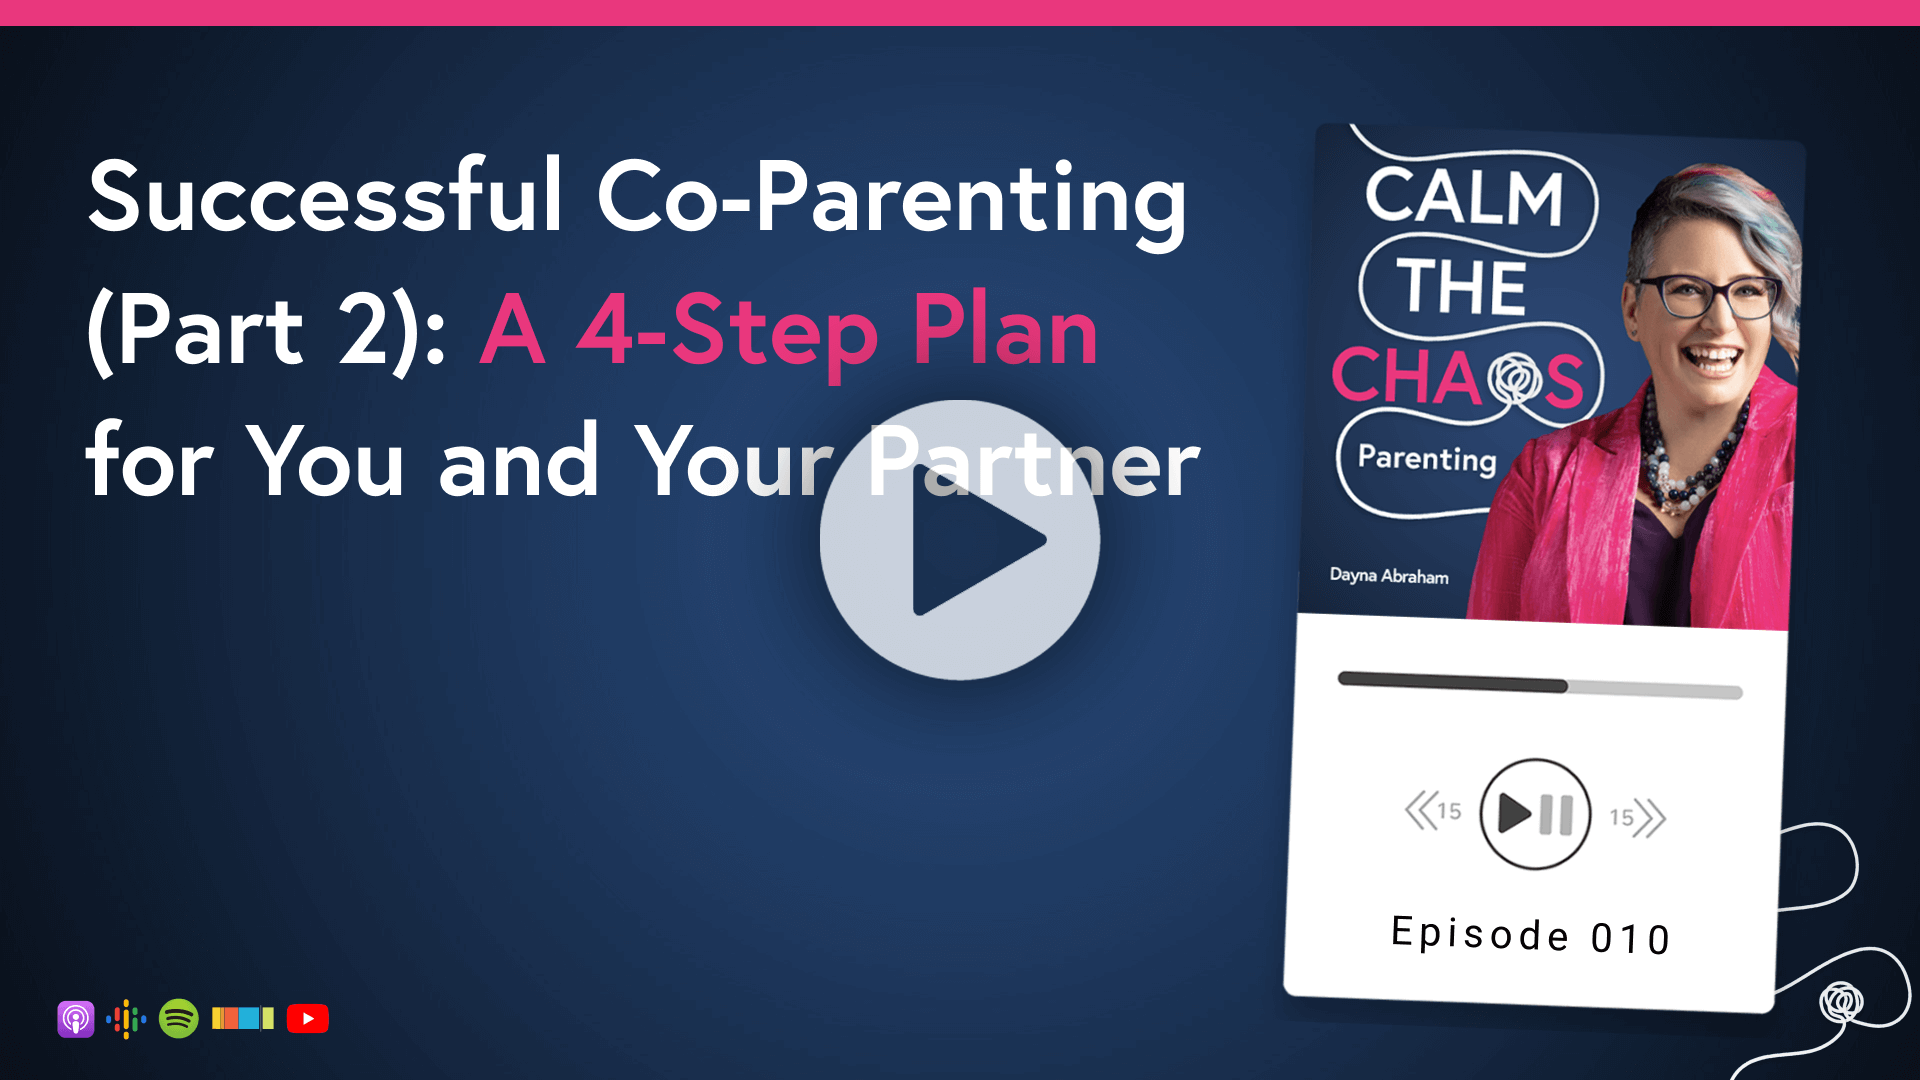 successful co-parenting, Dayna Abraham, Calm the Chaos